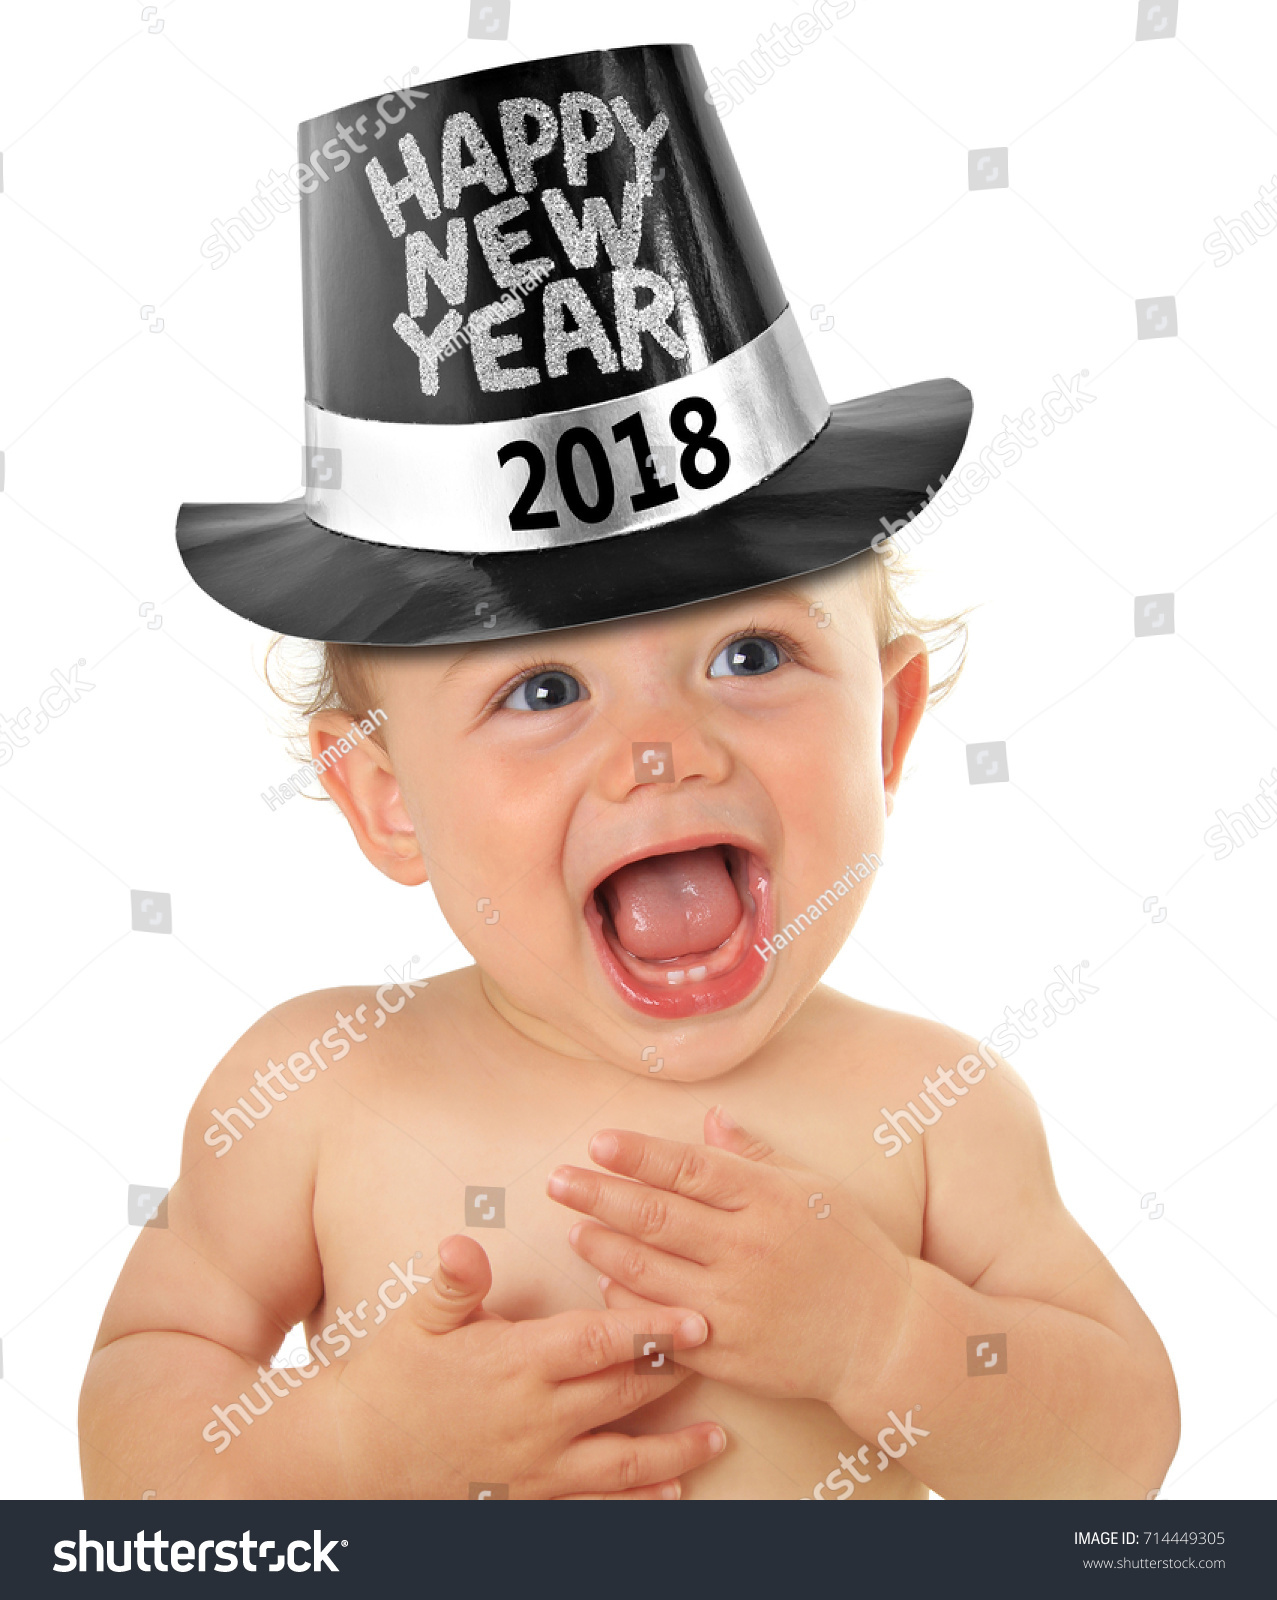 Image of funny baby new year pics